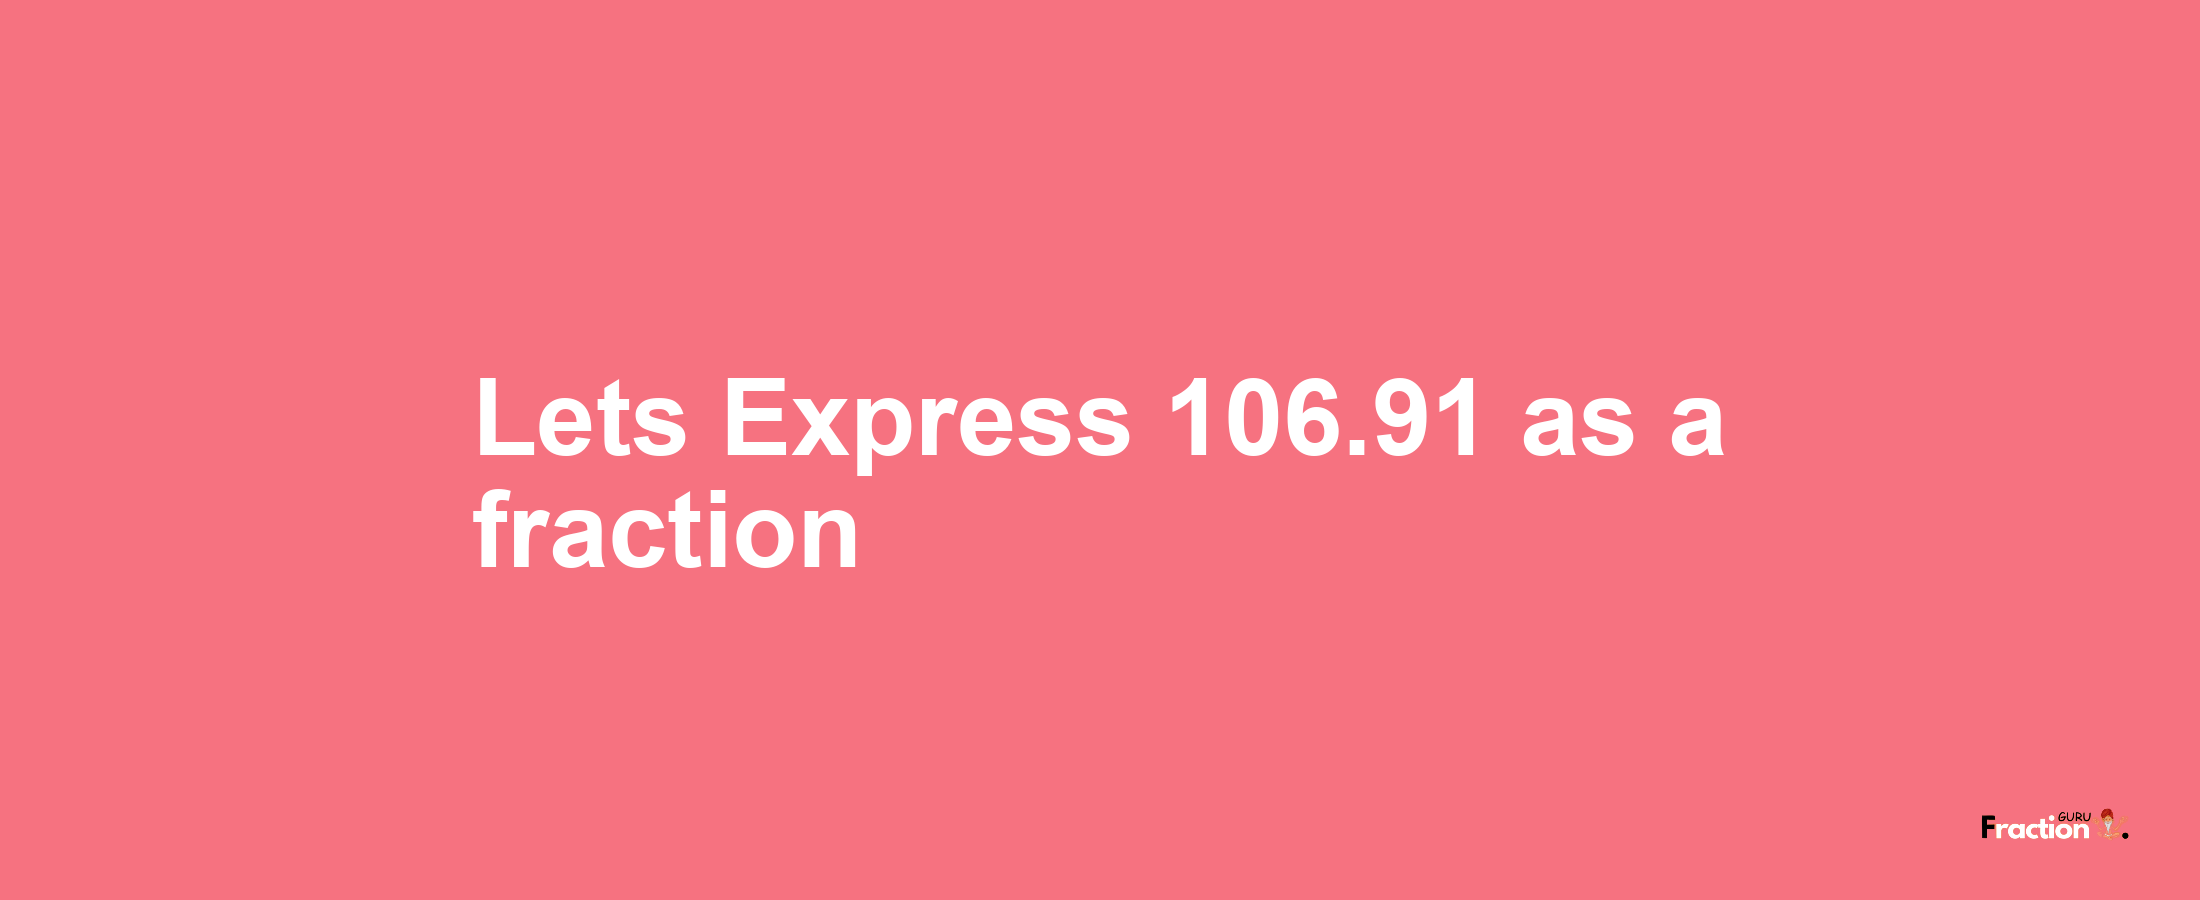 Lets Express 106.91 as afraction